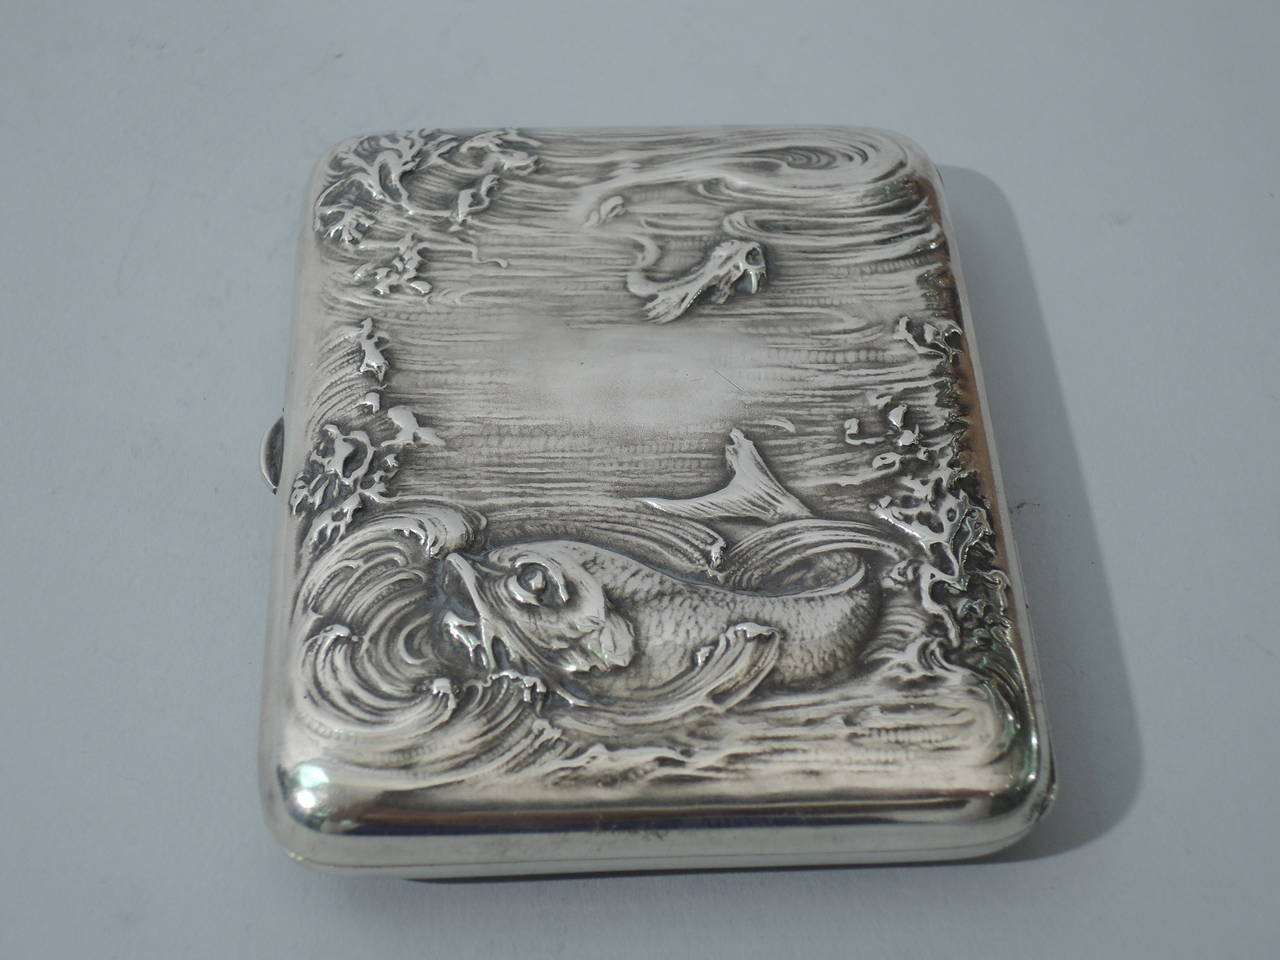 Sterling silver cigarette case with marine motif. Made by R. Blackinton in North Attleboro, Mass., ca. 1900. Rectangular and hinged. Chased and repousse double-sided aquatic scene: water, plants, and fish. Interior gilt. Hallmark includes model no.